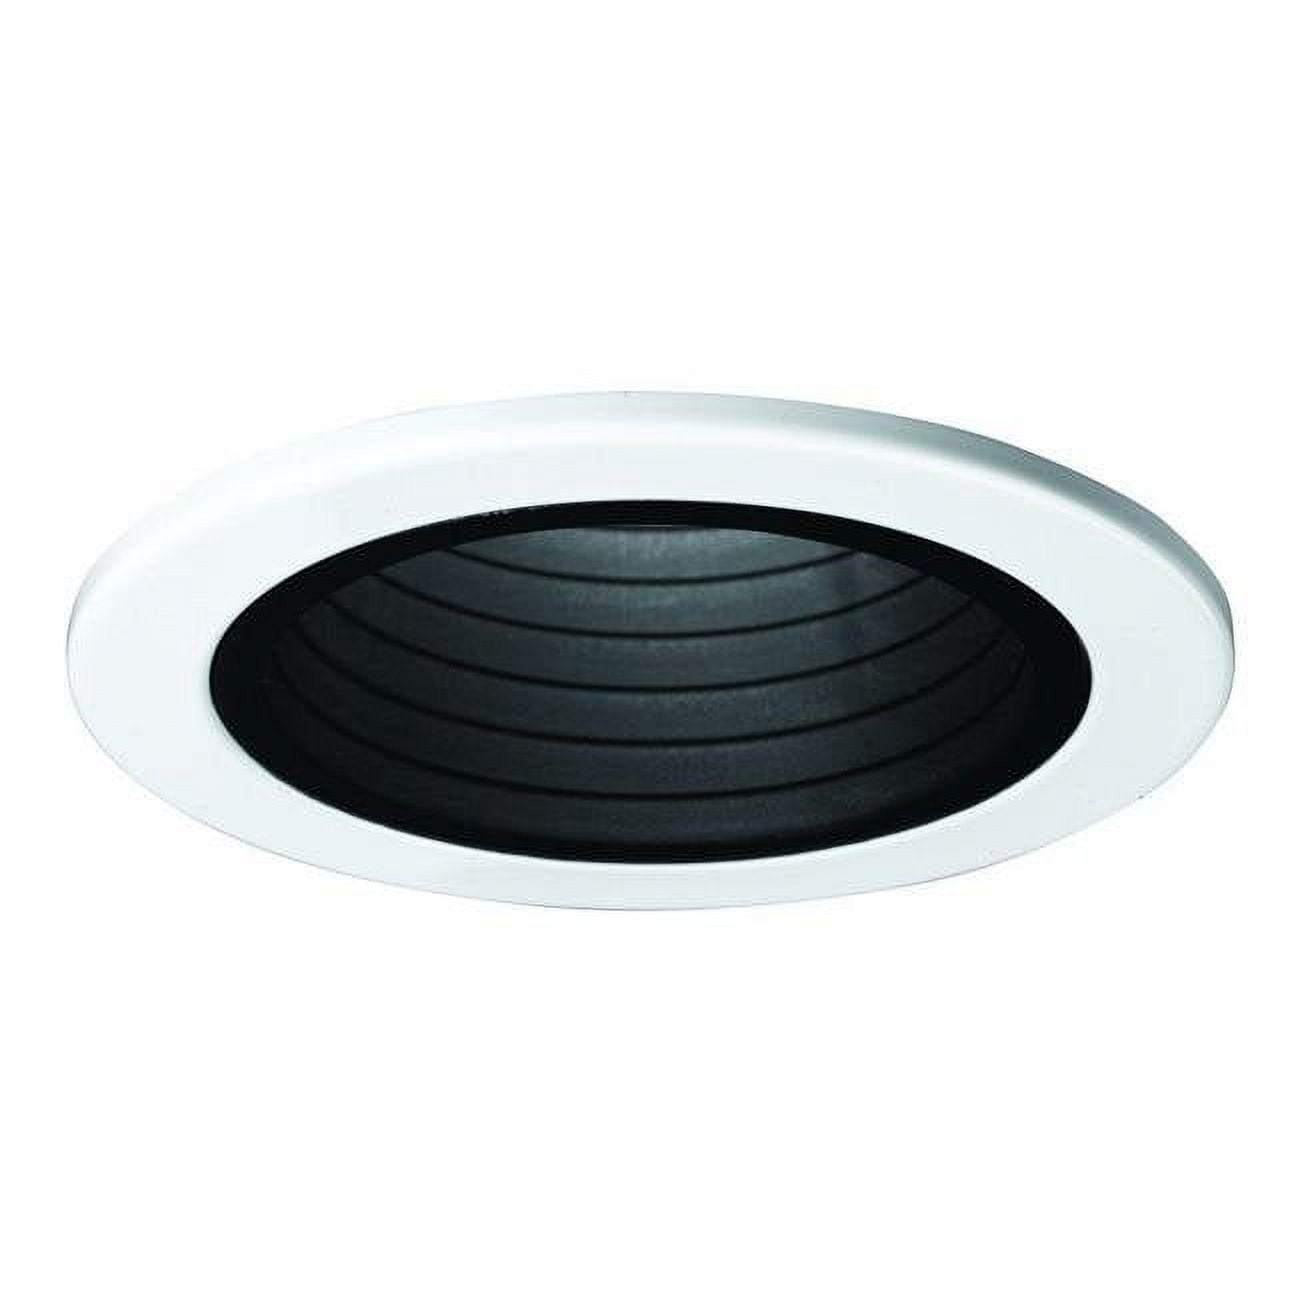 Re-4001bb 4 In. Recessed Lighting Plastic Step Baffle With White Trim Ring - Black